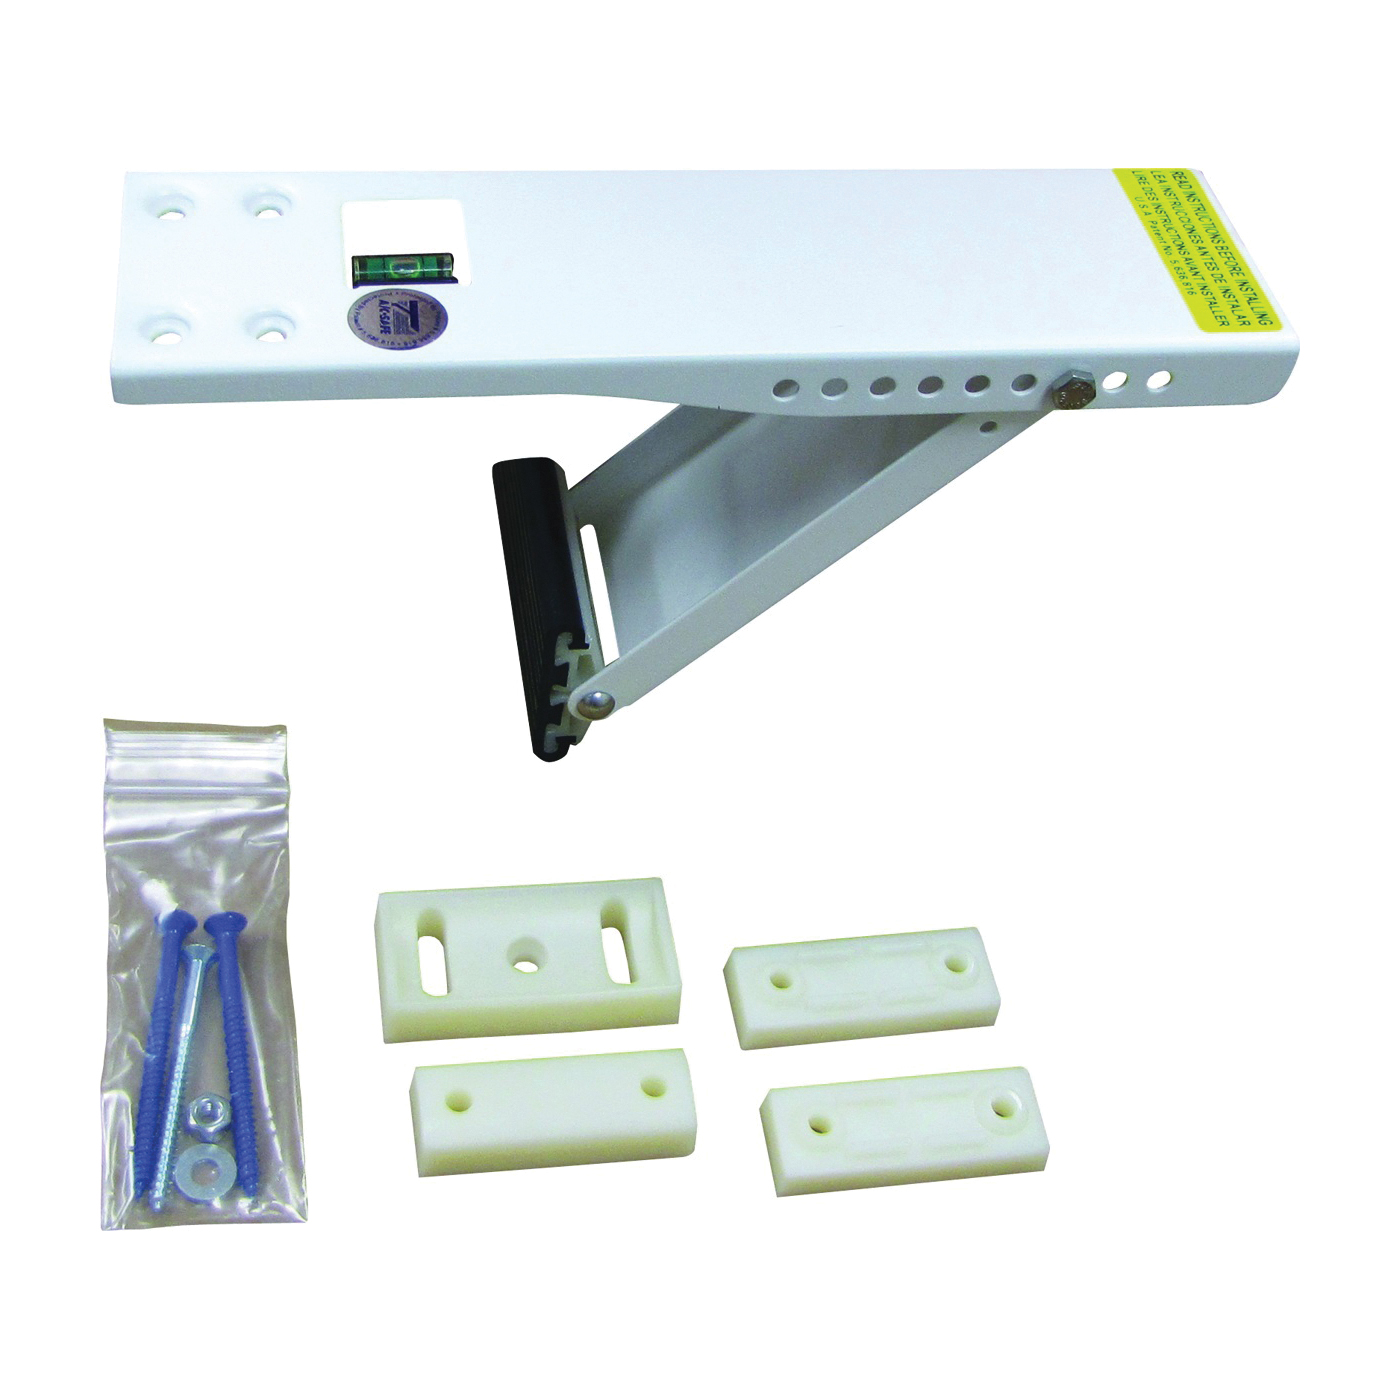 AS160 Window Support Bracket, Steel, Baked-On Epoxy, For: Air Conditioners up to 160 lb